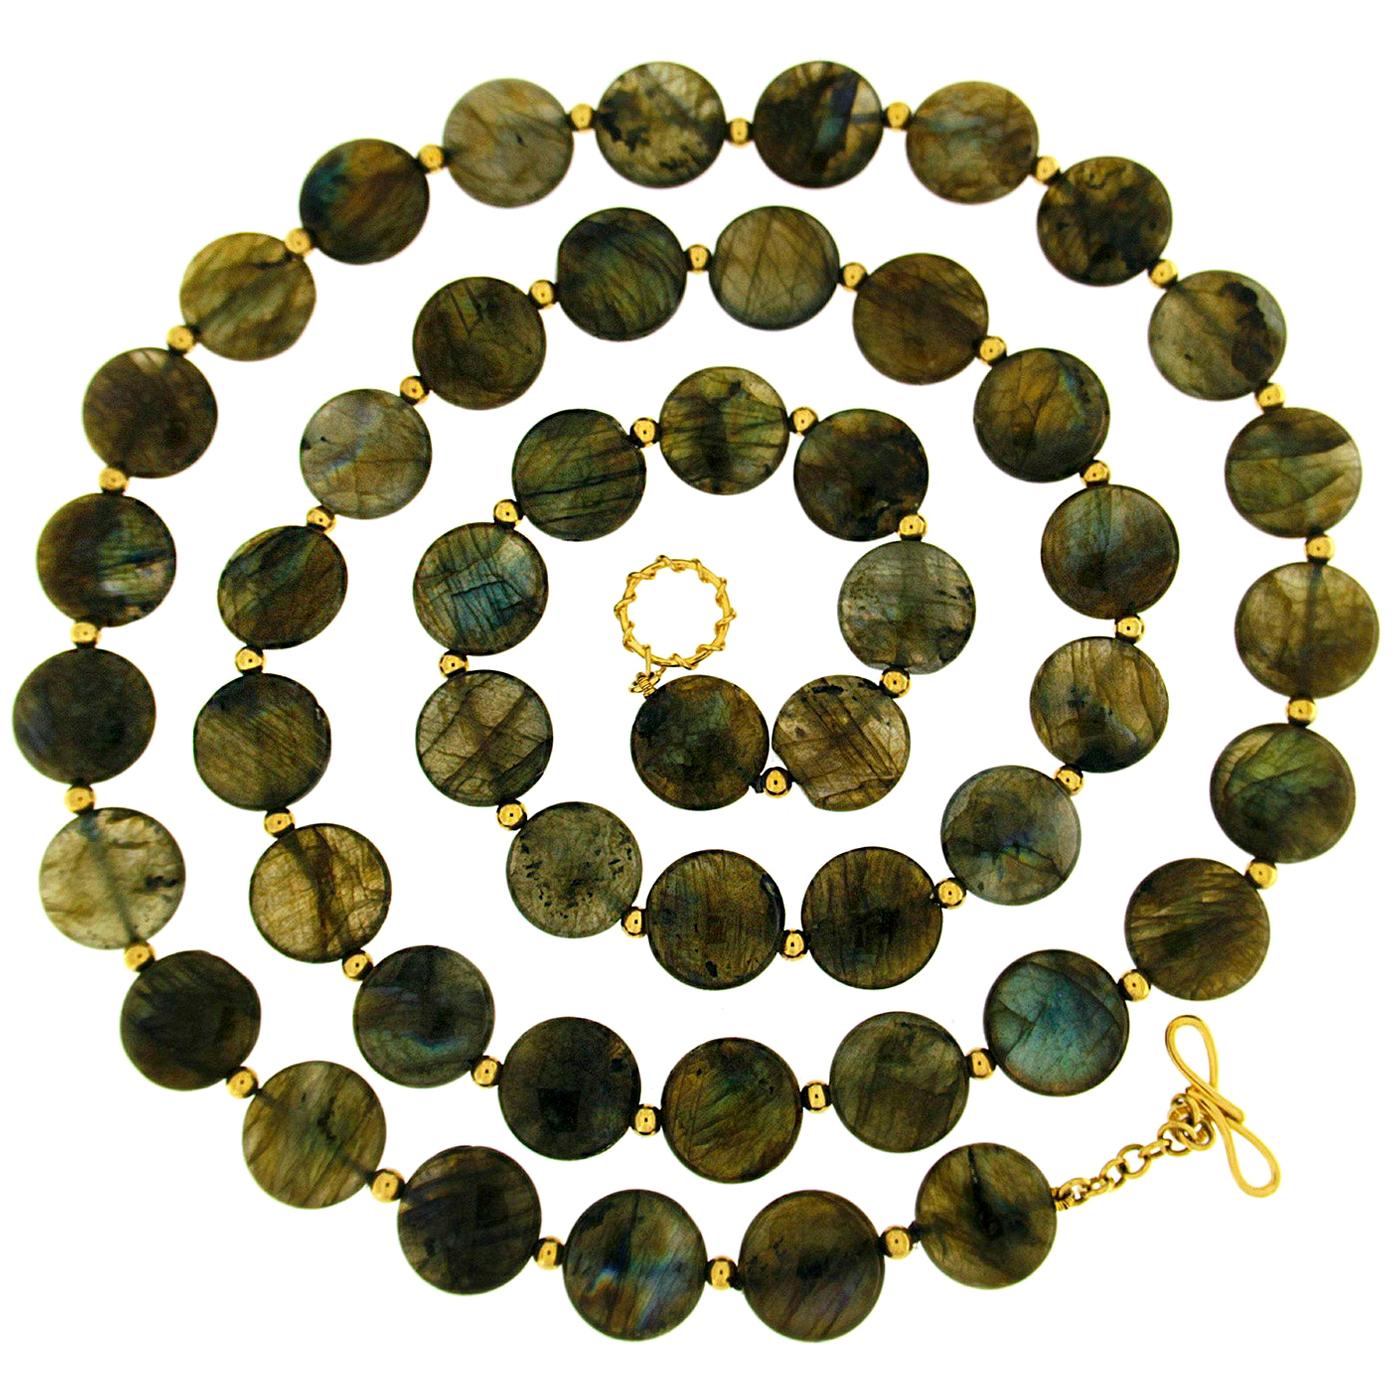 Valentin Magro Labradorite Disk Necklace with Gold Beads